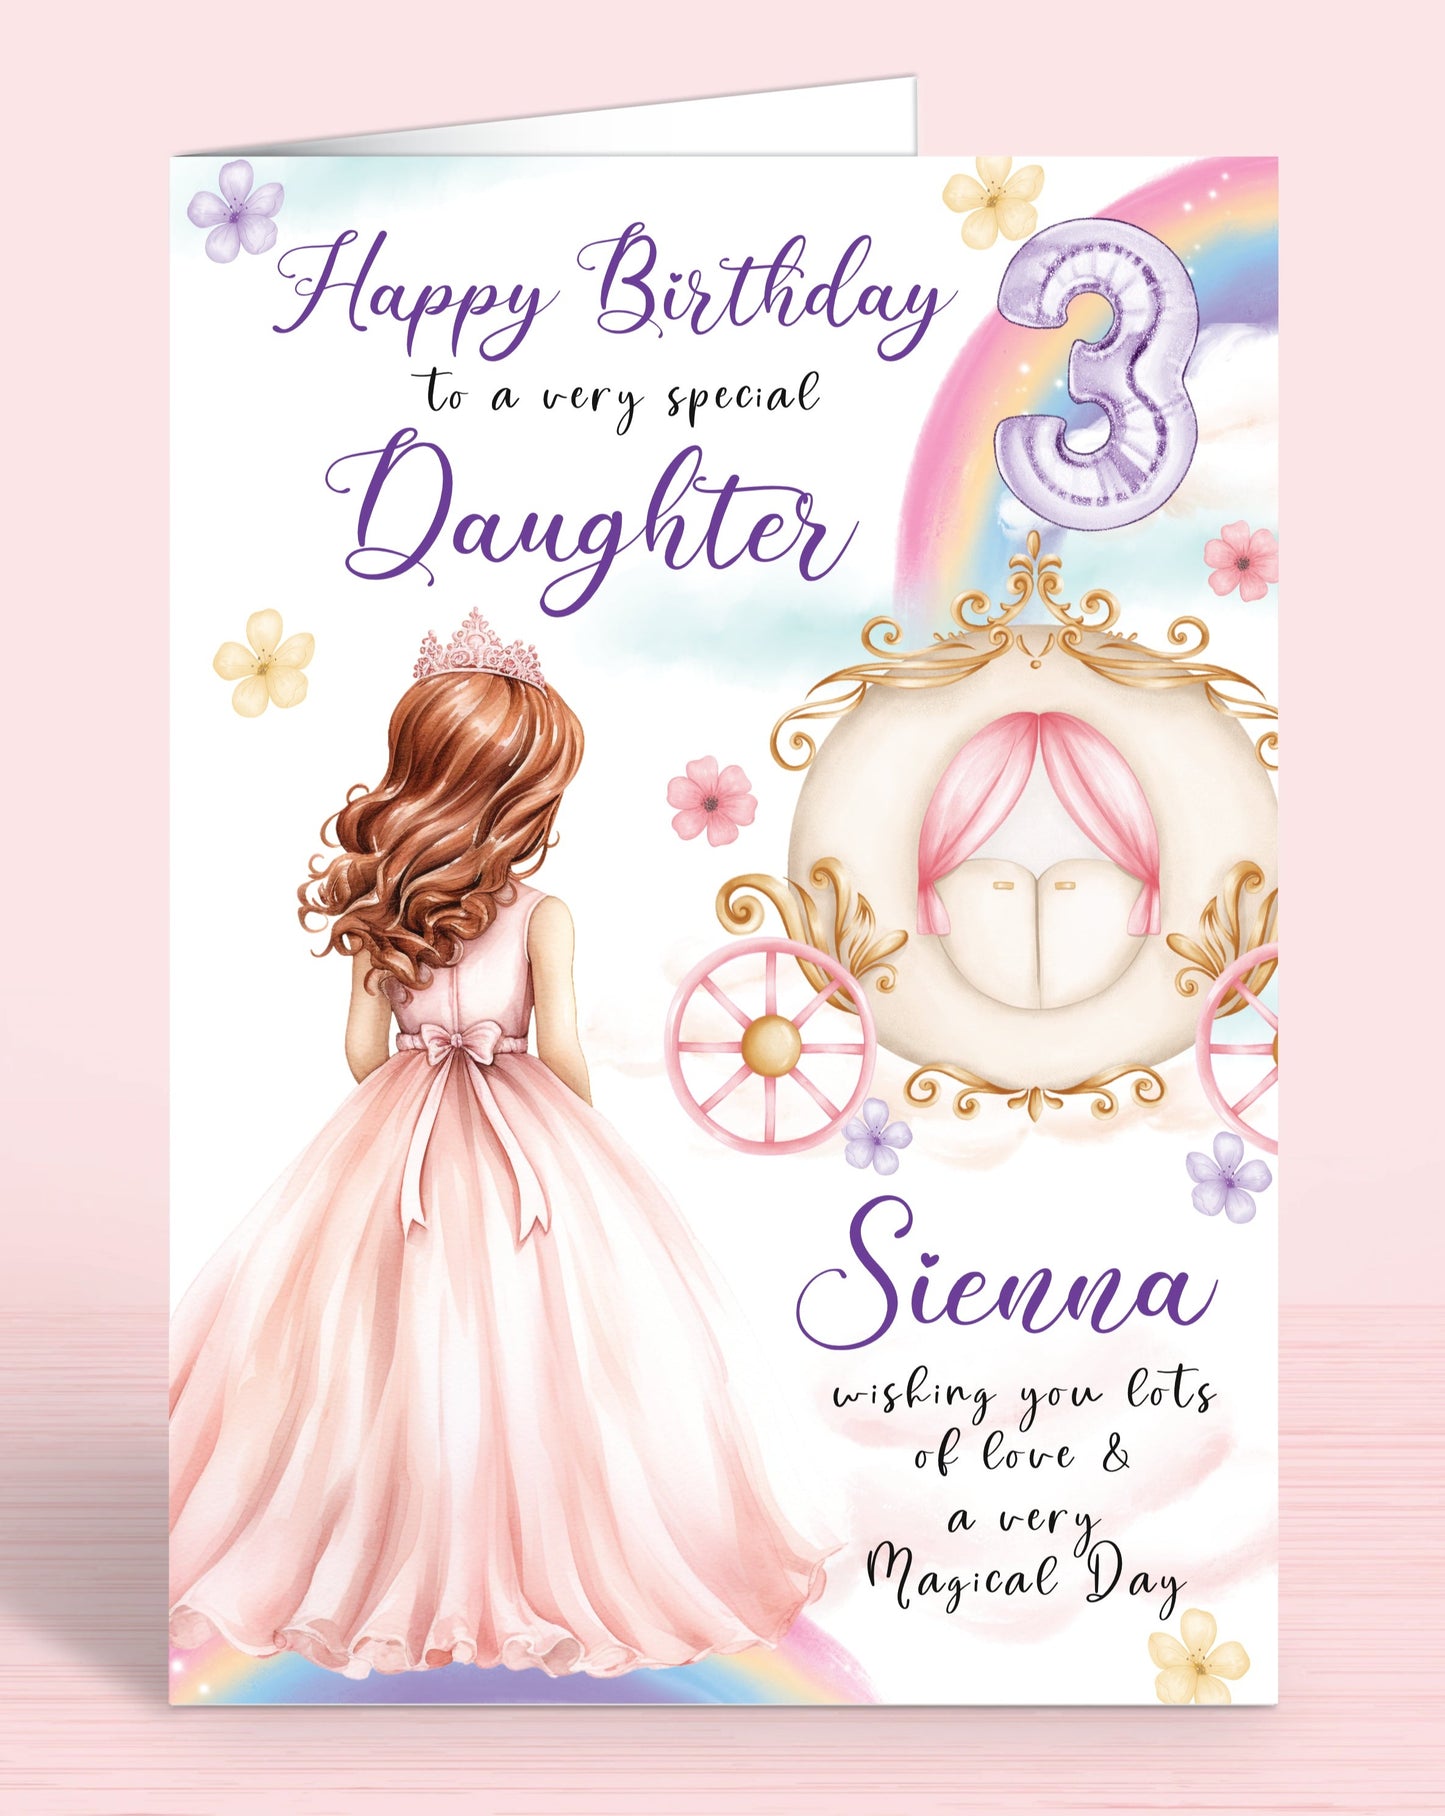 Princess Carriage Personalised Birthday Card, Granddaughter 3rd, 4th Birthday Card, Happy Birthday to a very special Daughter, [Name] wishing you lots of love & a very Magical Day [GIRL C] RED HAIR | Oliver Rose Designs